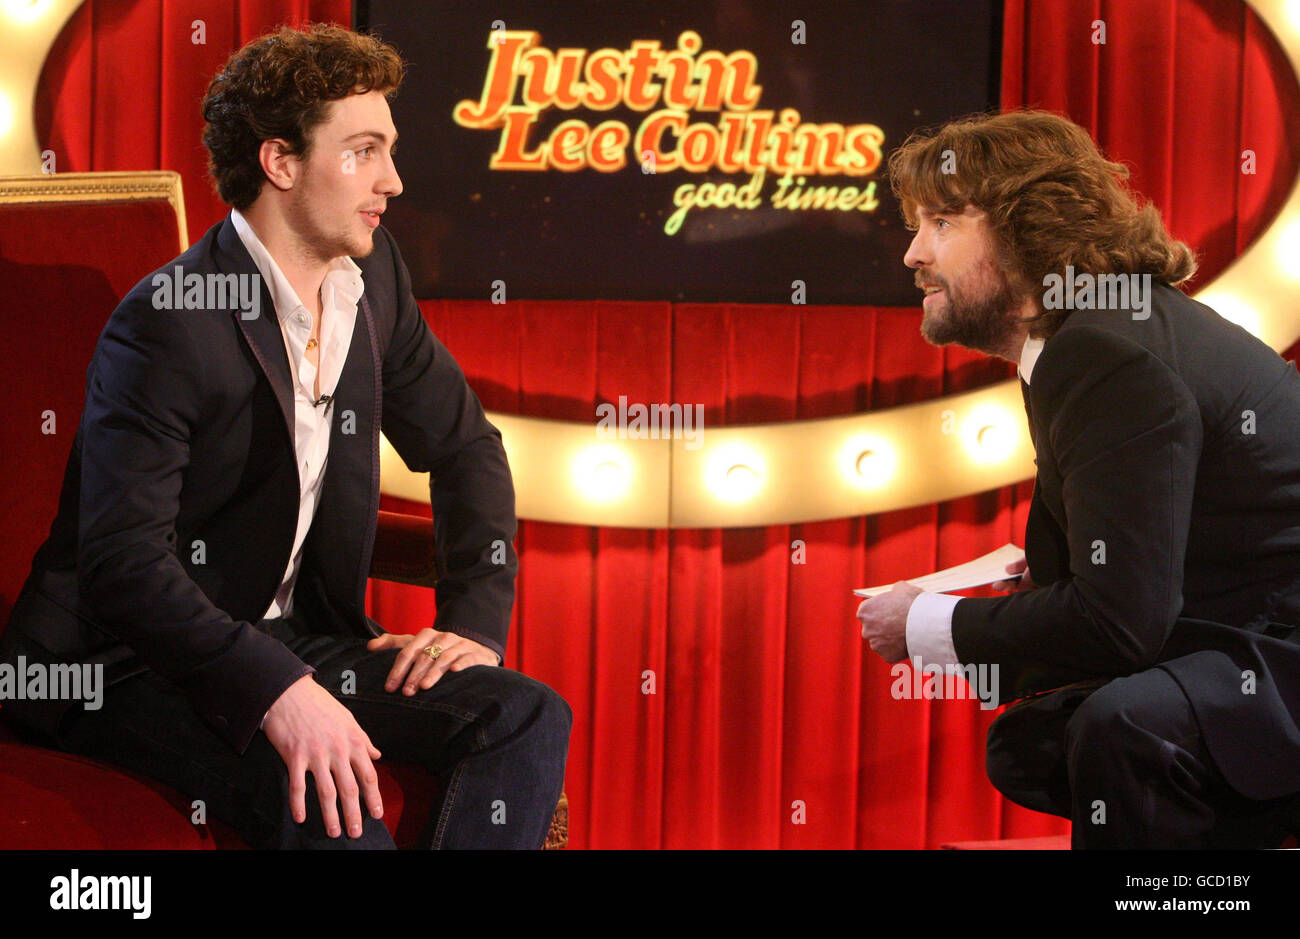 Justin Lee Collins (right) and actor Aaron Johnson during the recording of 'Justin Lee Collins: Good Times' at the Rivoli Ballroom, in Brockley, south east London. Stock Photo